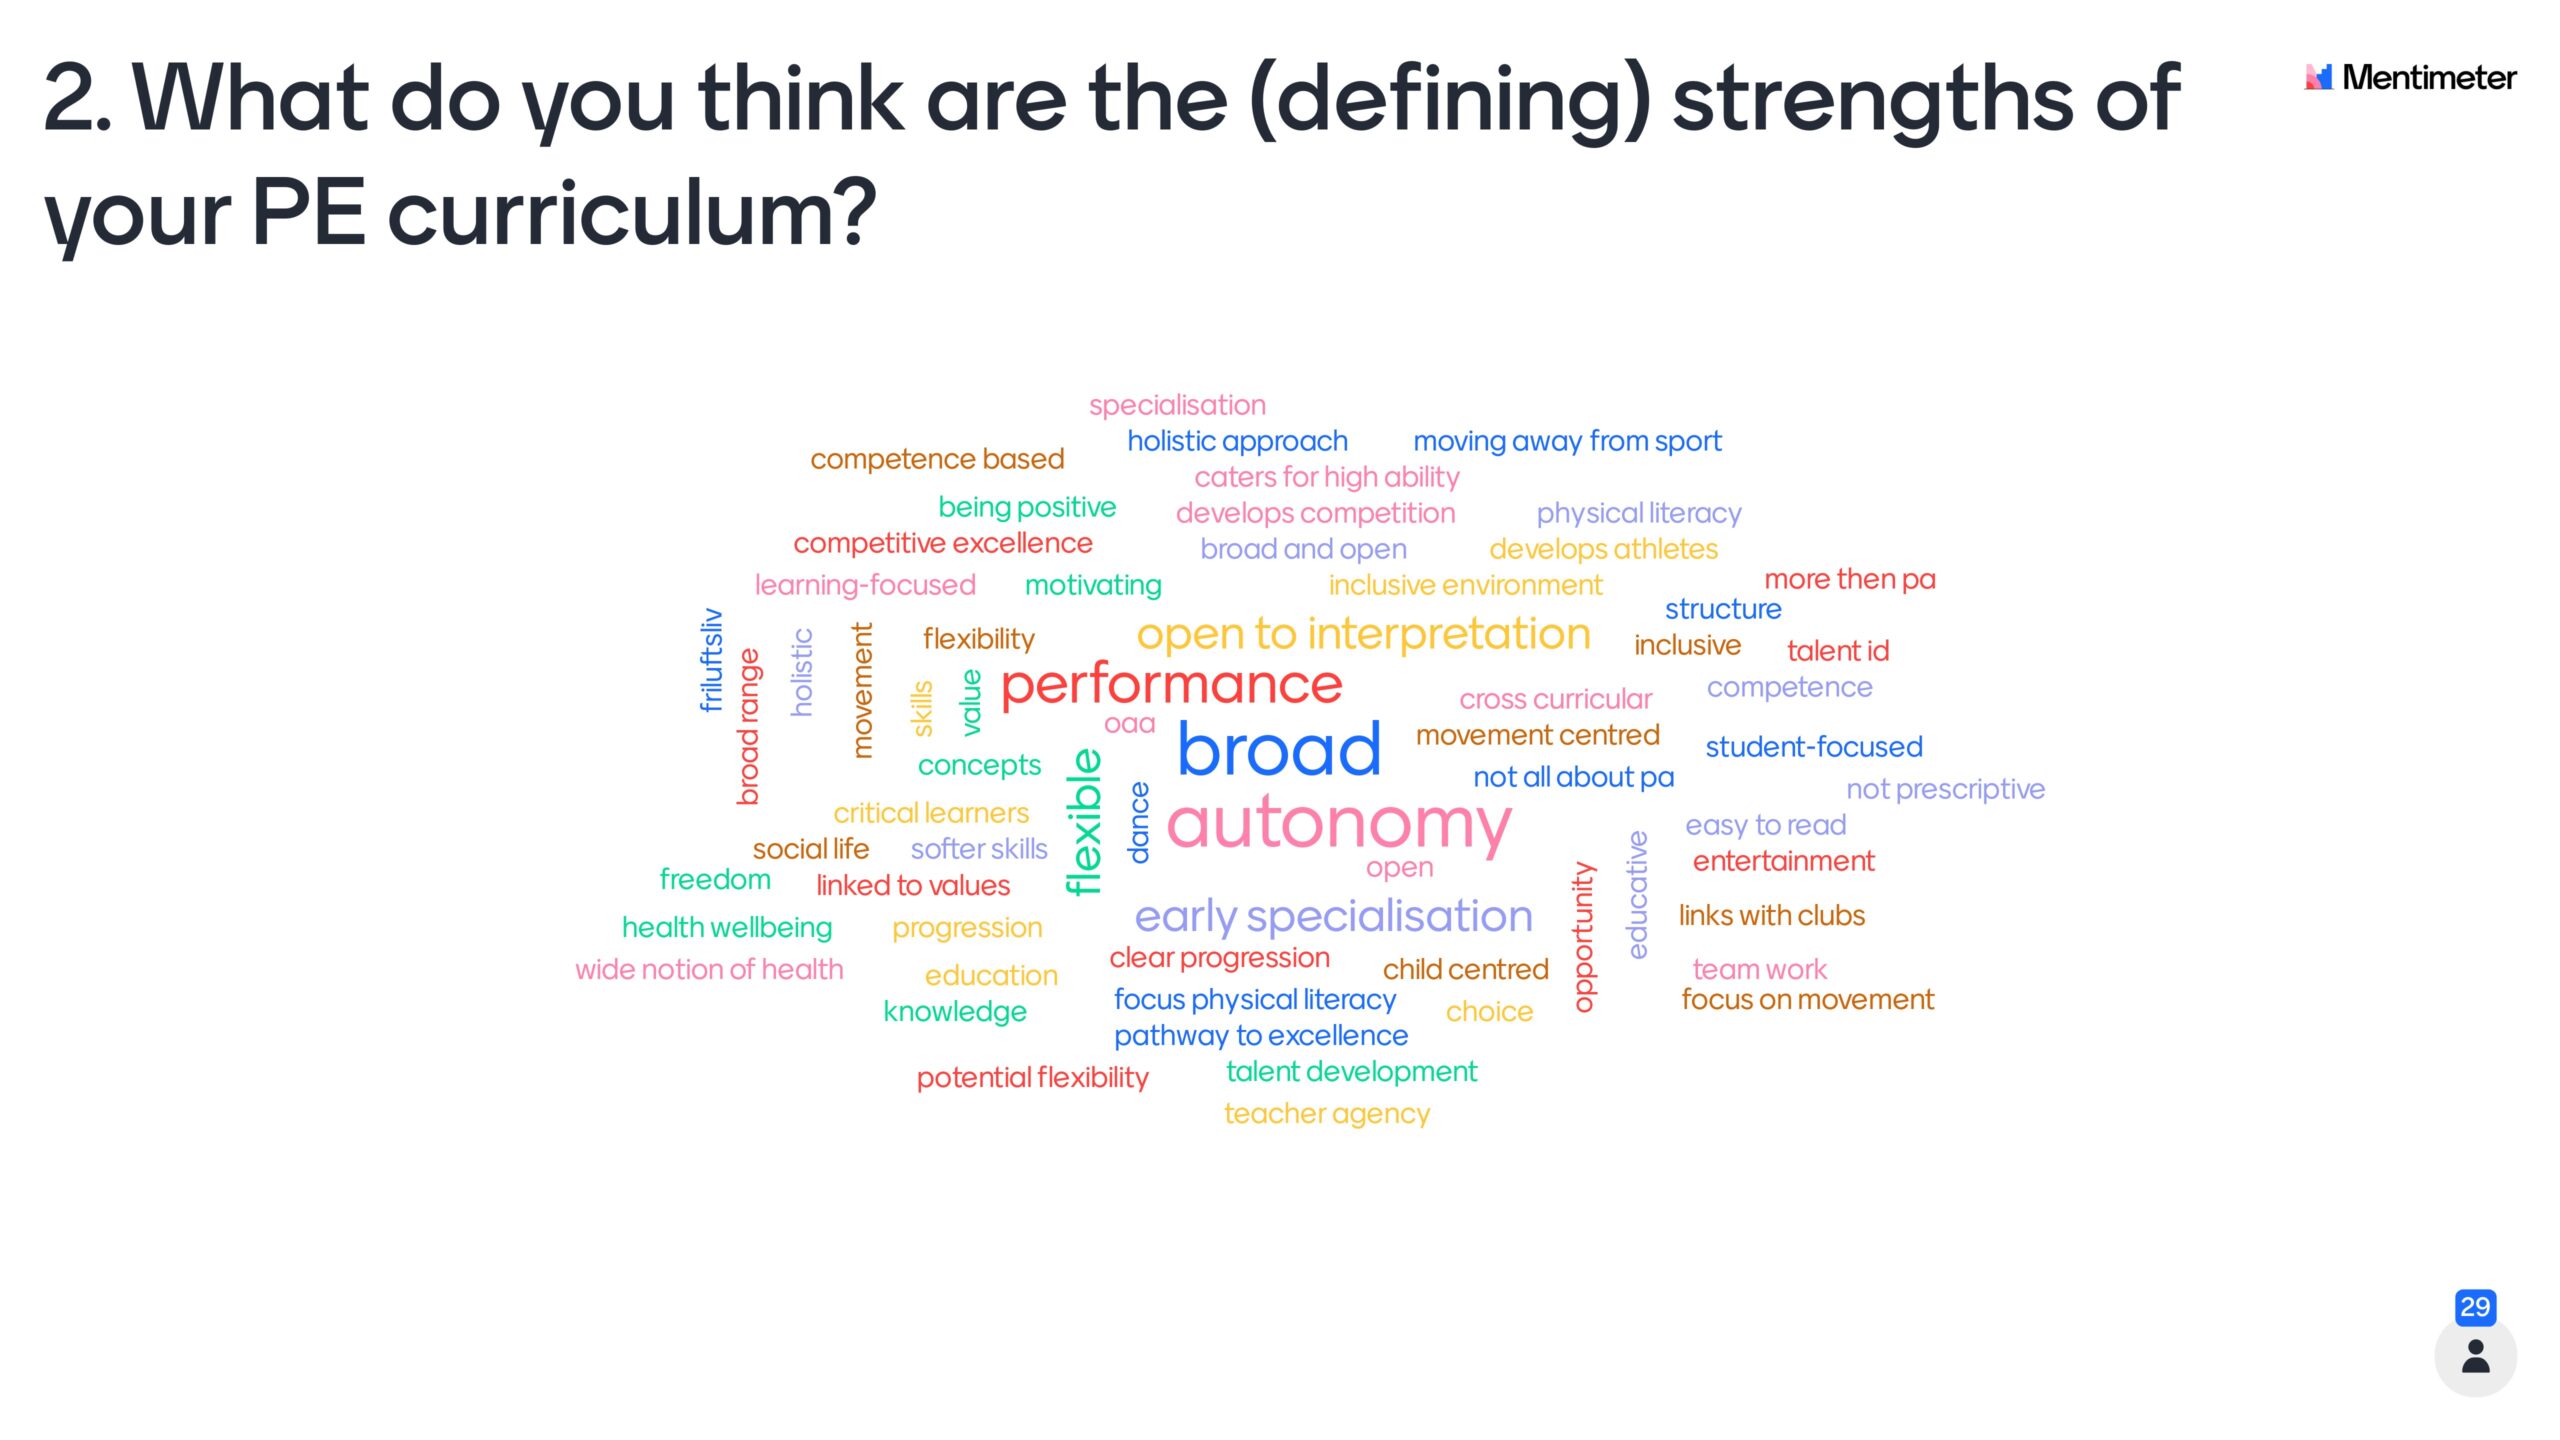 Word cloud describing the defining strengths of their home PE curricula as identified by respondents 